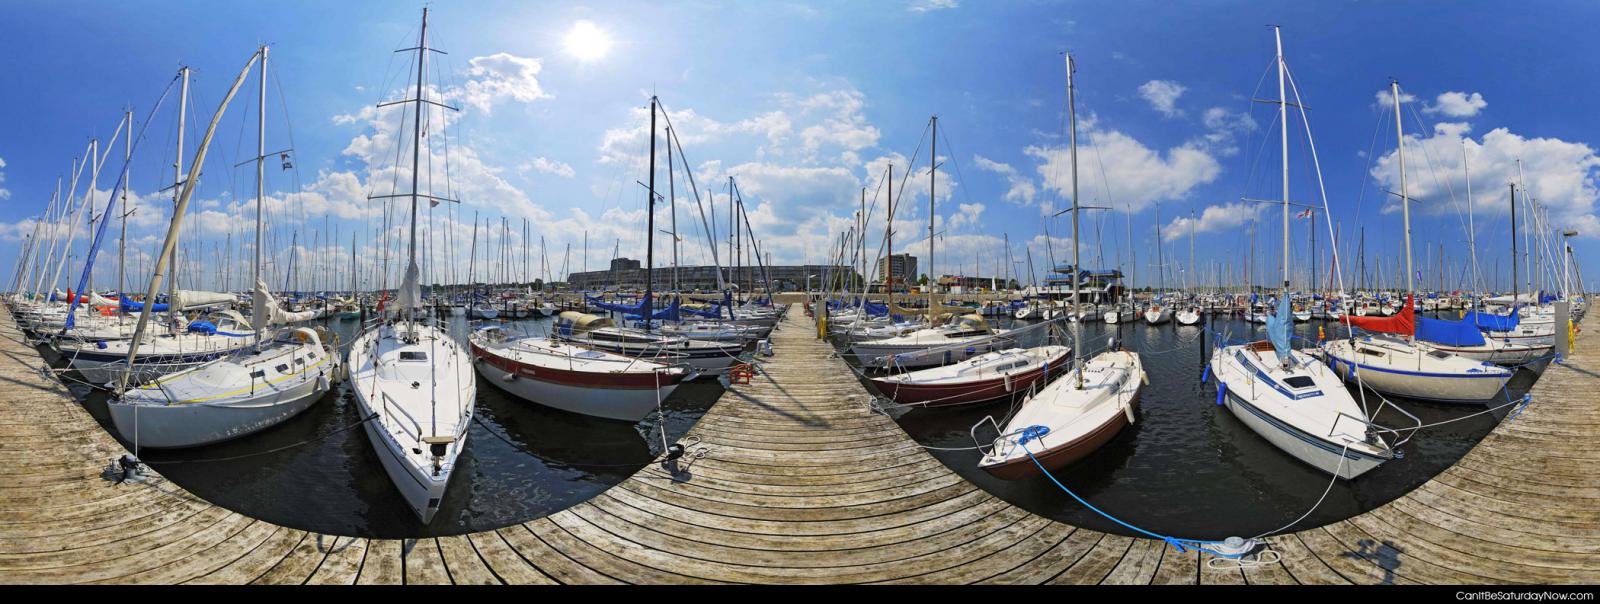 180 dock - 180 degree photo of a dock